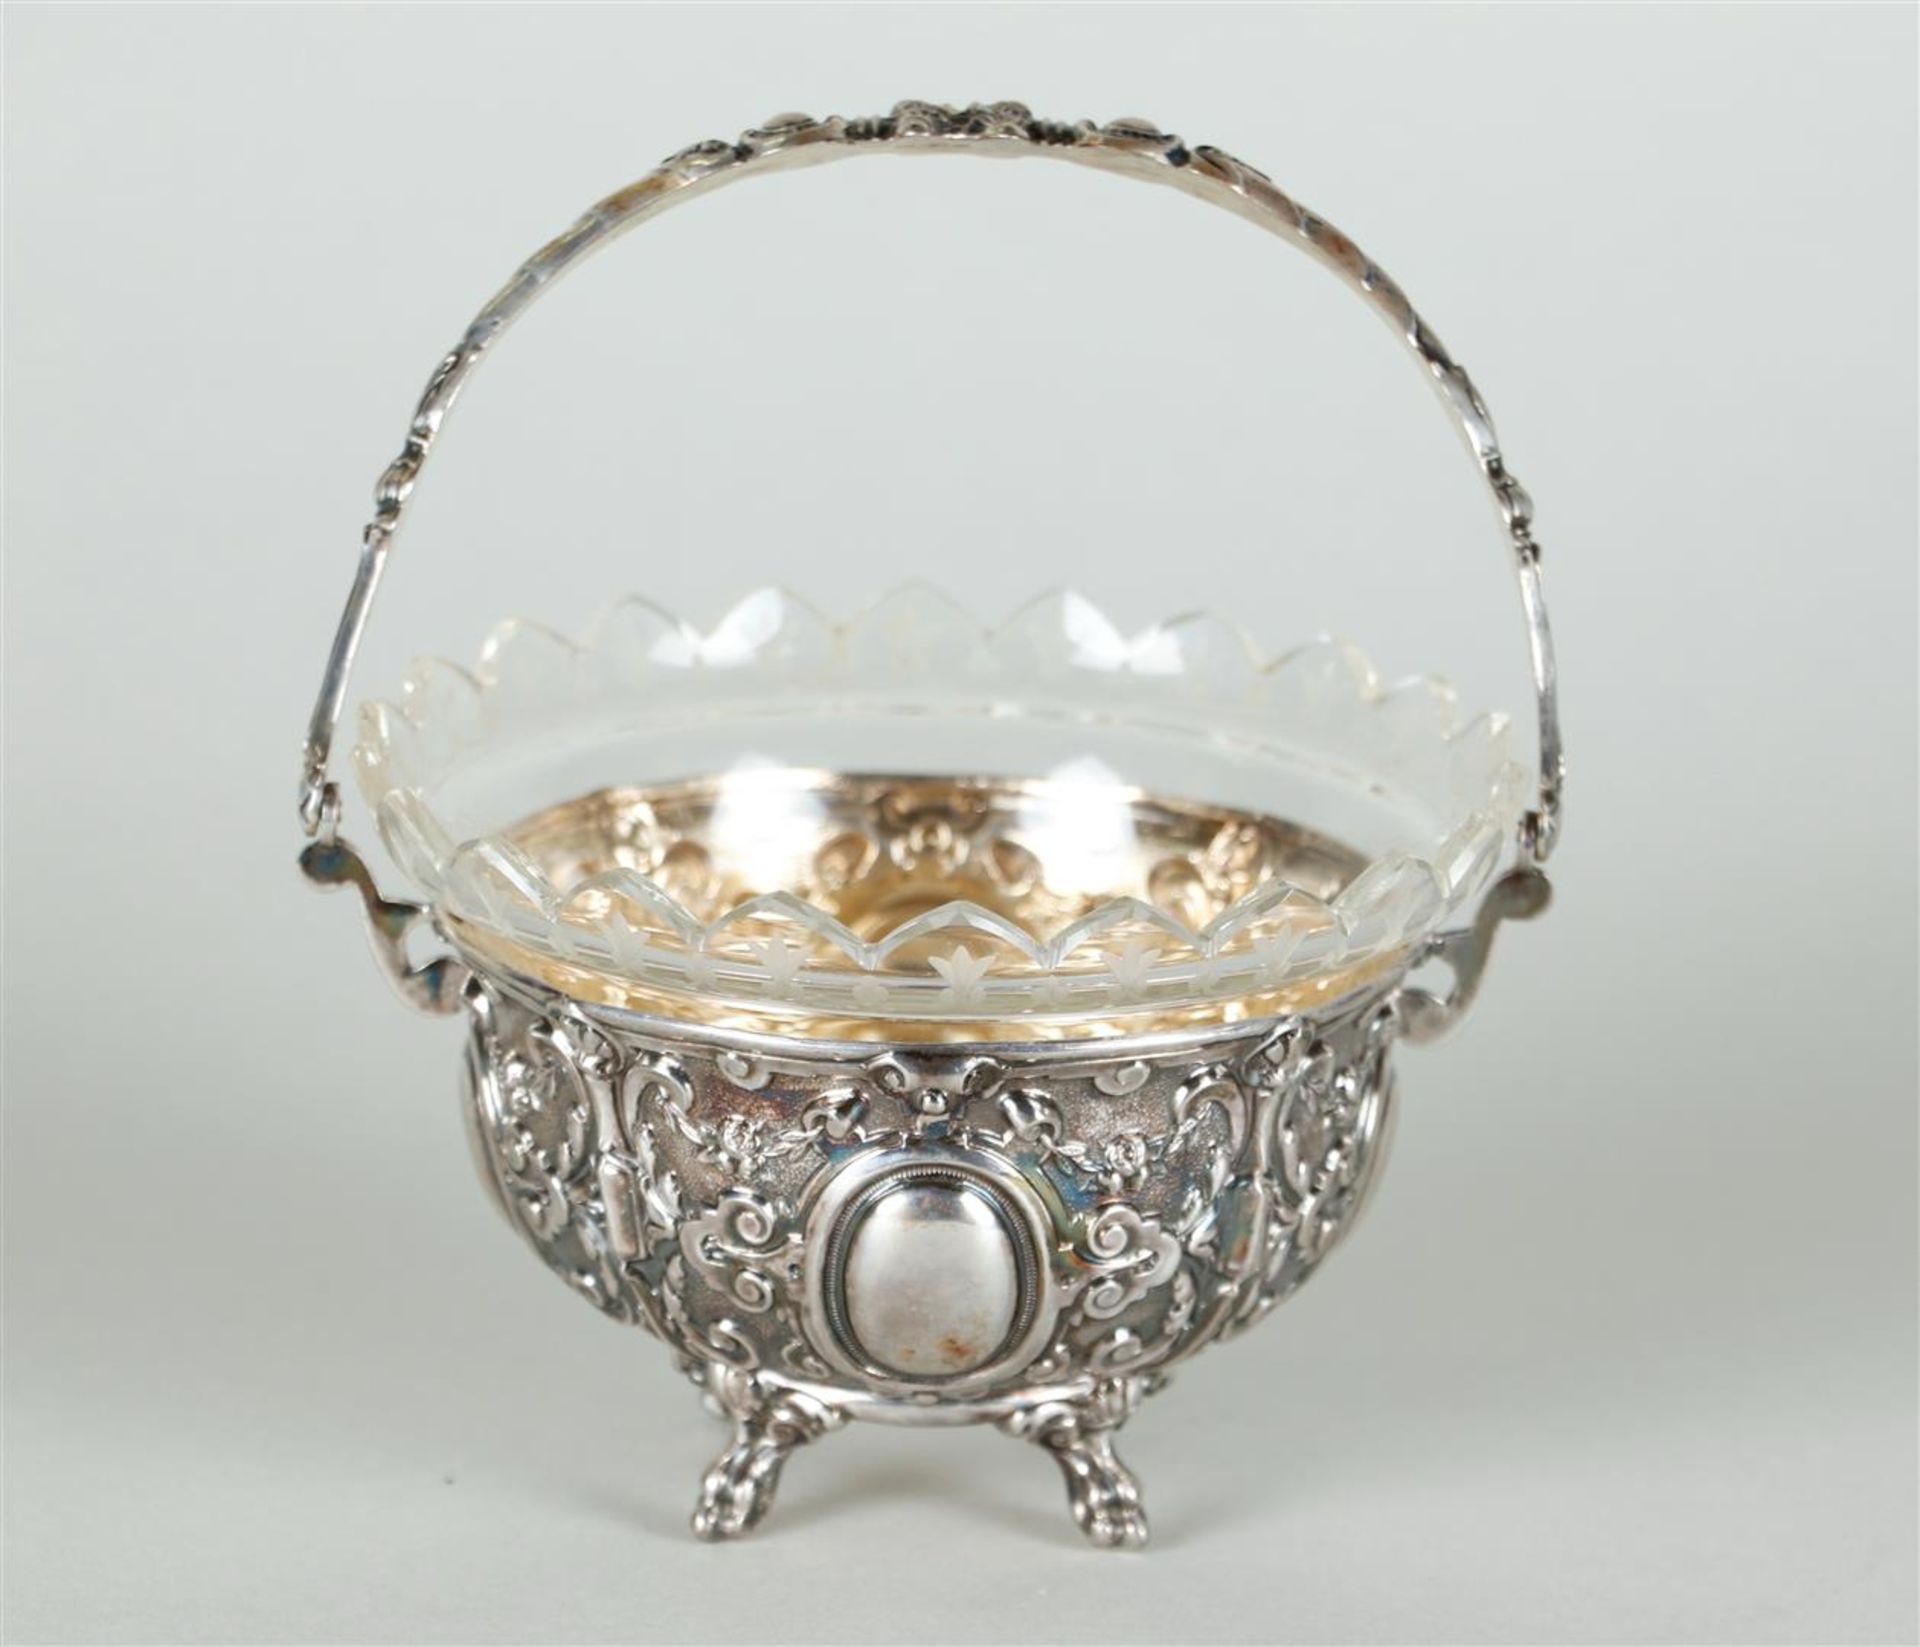 A cut glass chocolate dish in Neo Renaissance silver frame. Unclearly marked on the handle